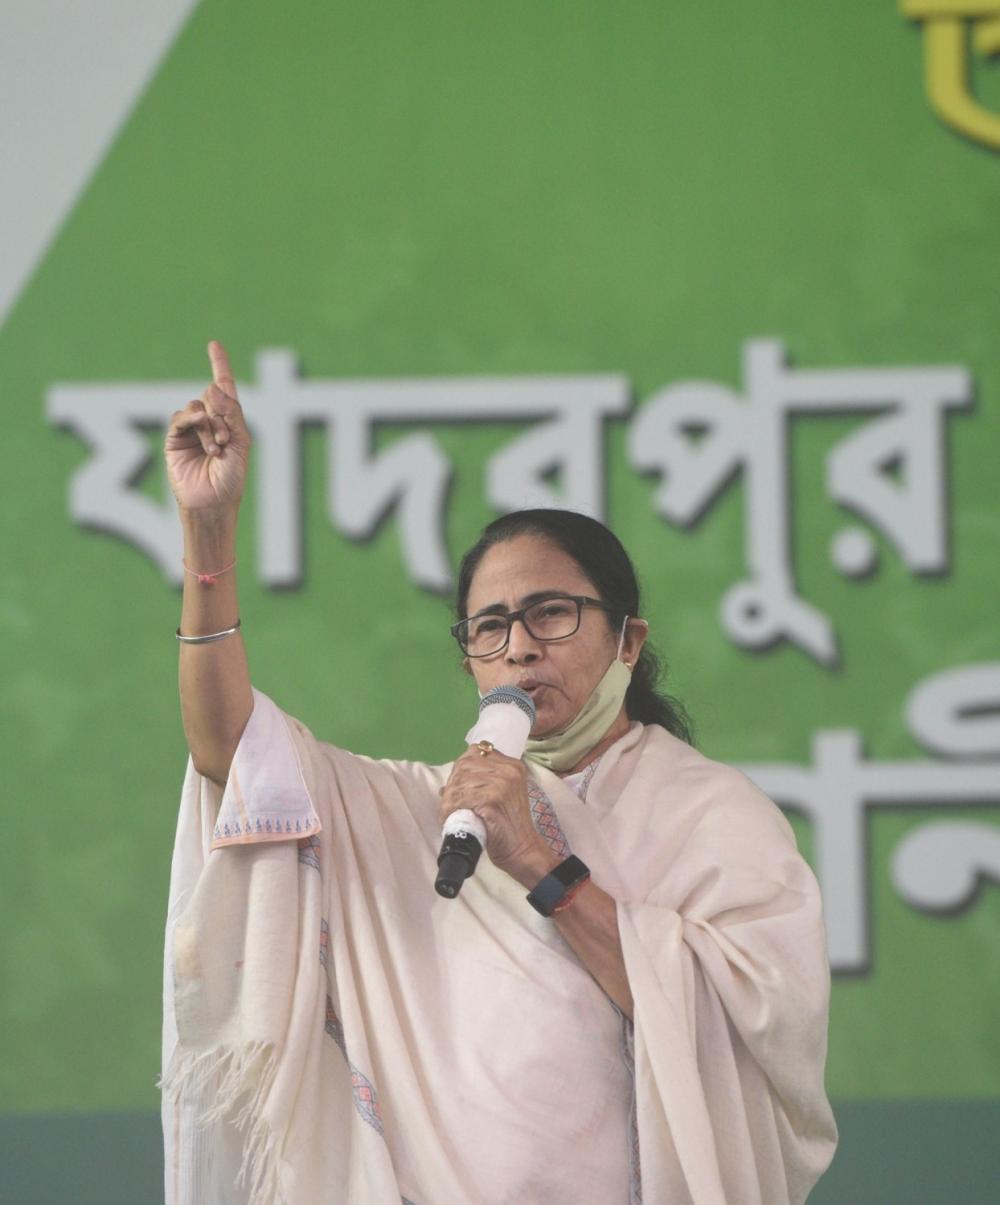 The Weekend Leader - Mamata misusing agencies to remain relevant in KMC polls: BJP